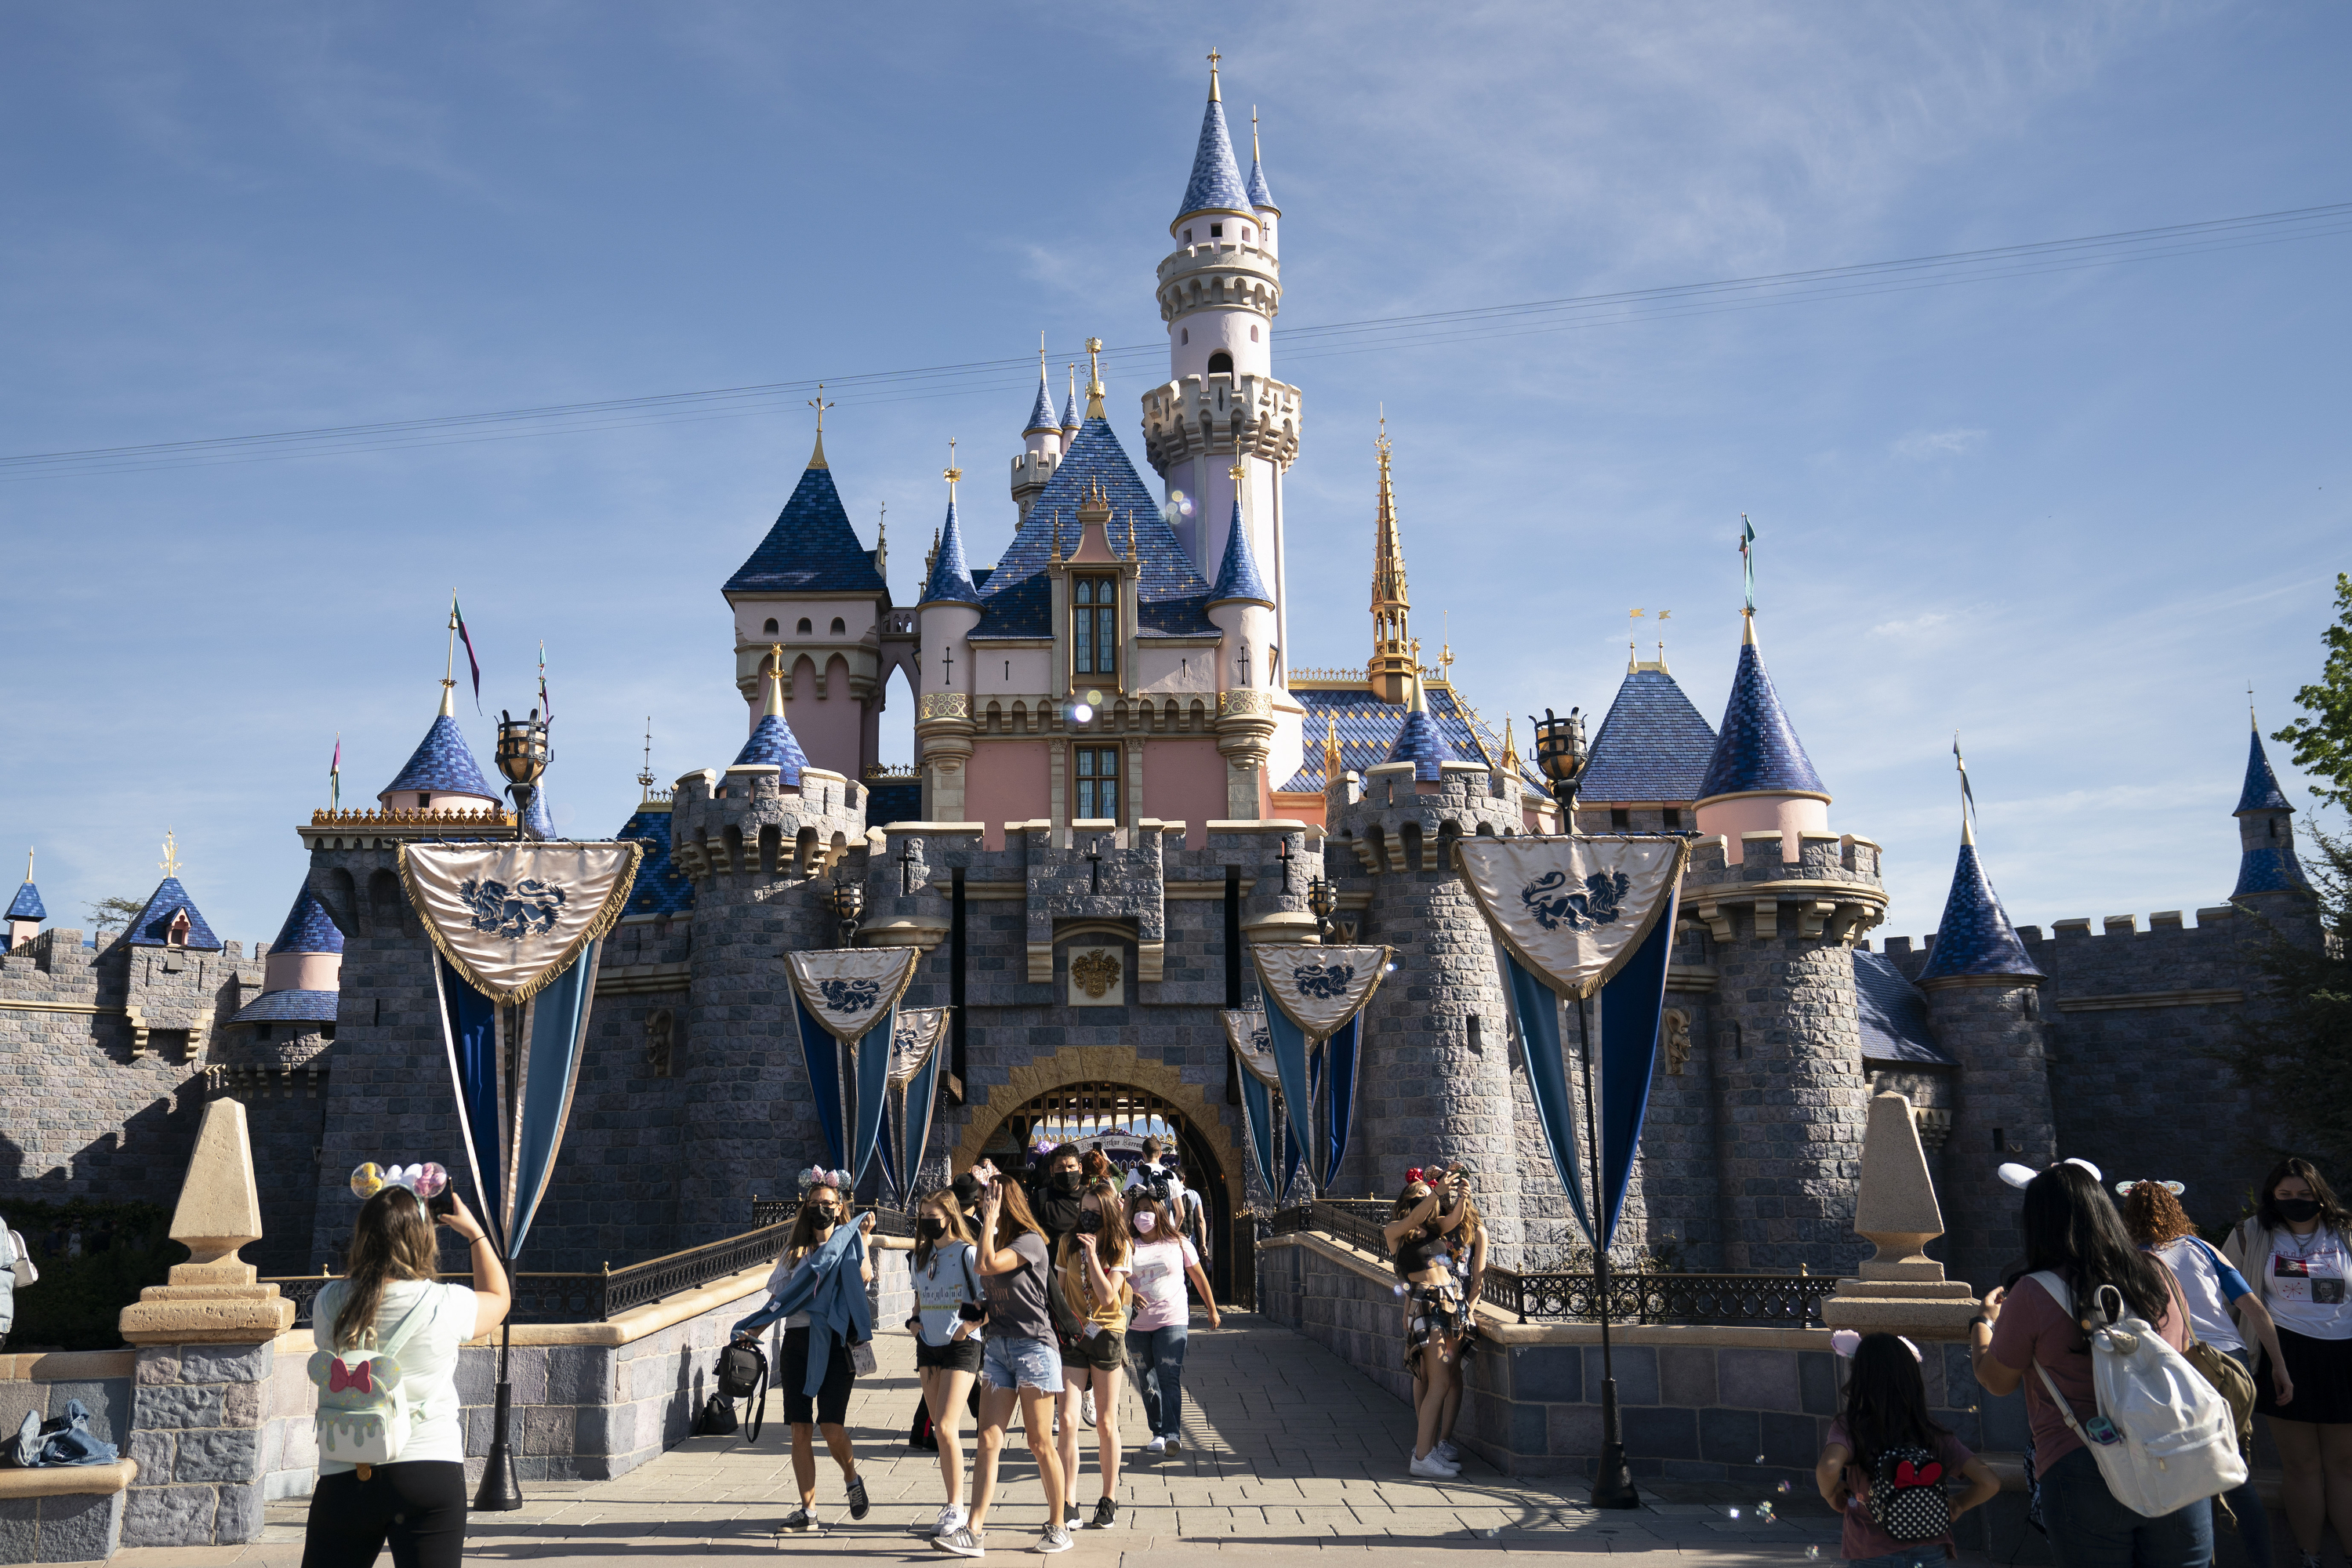 The new world would open at Disneyland California